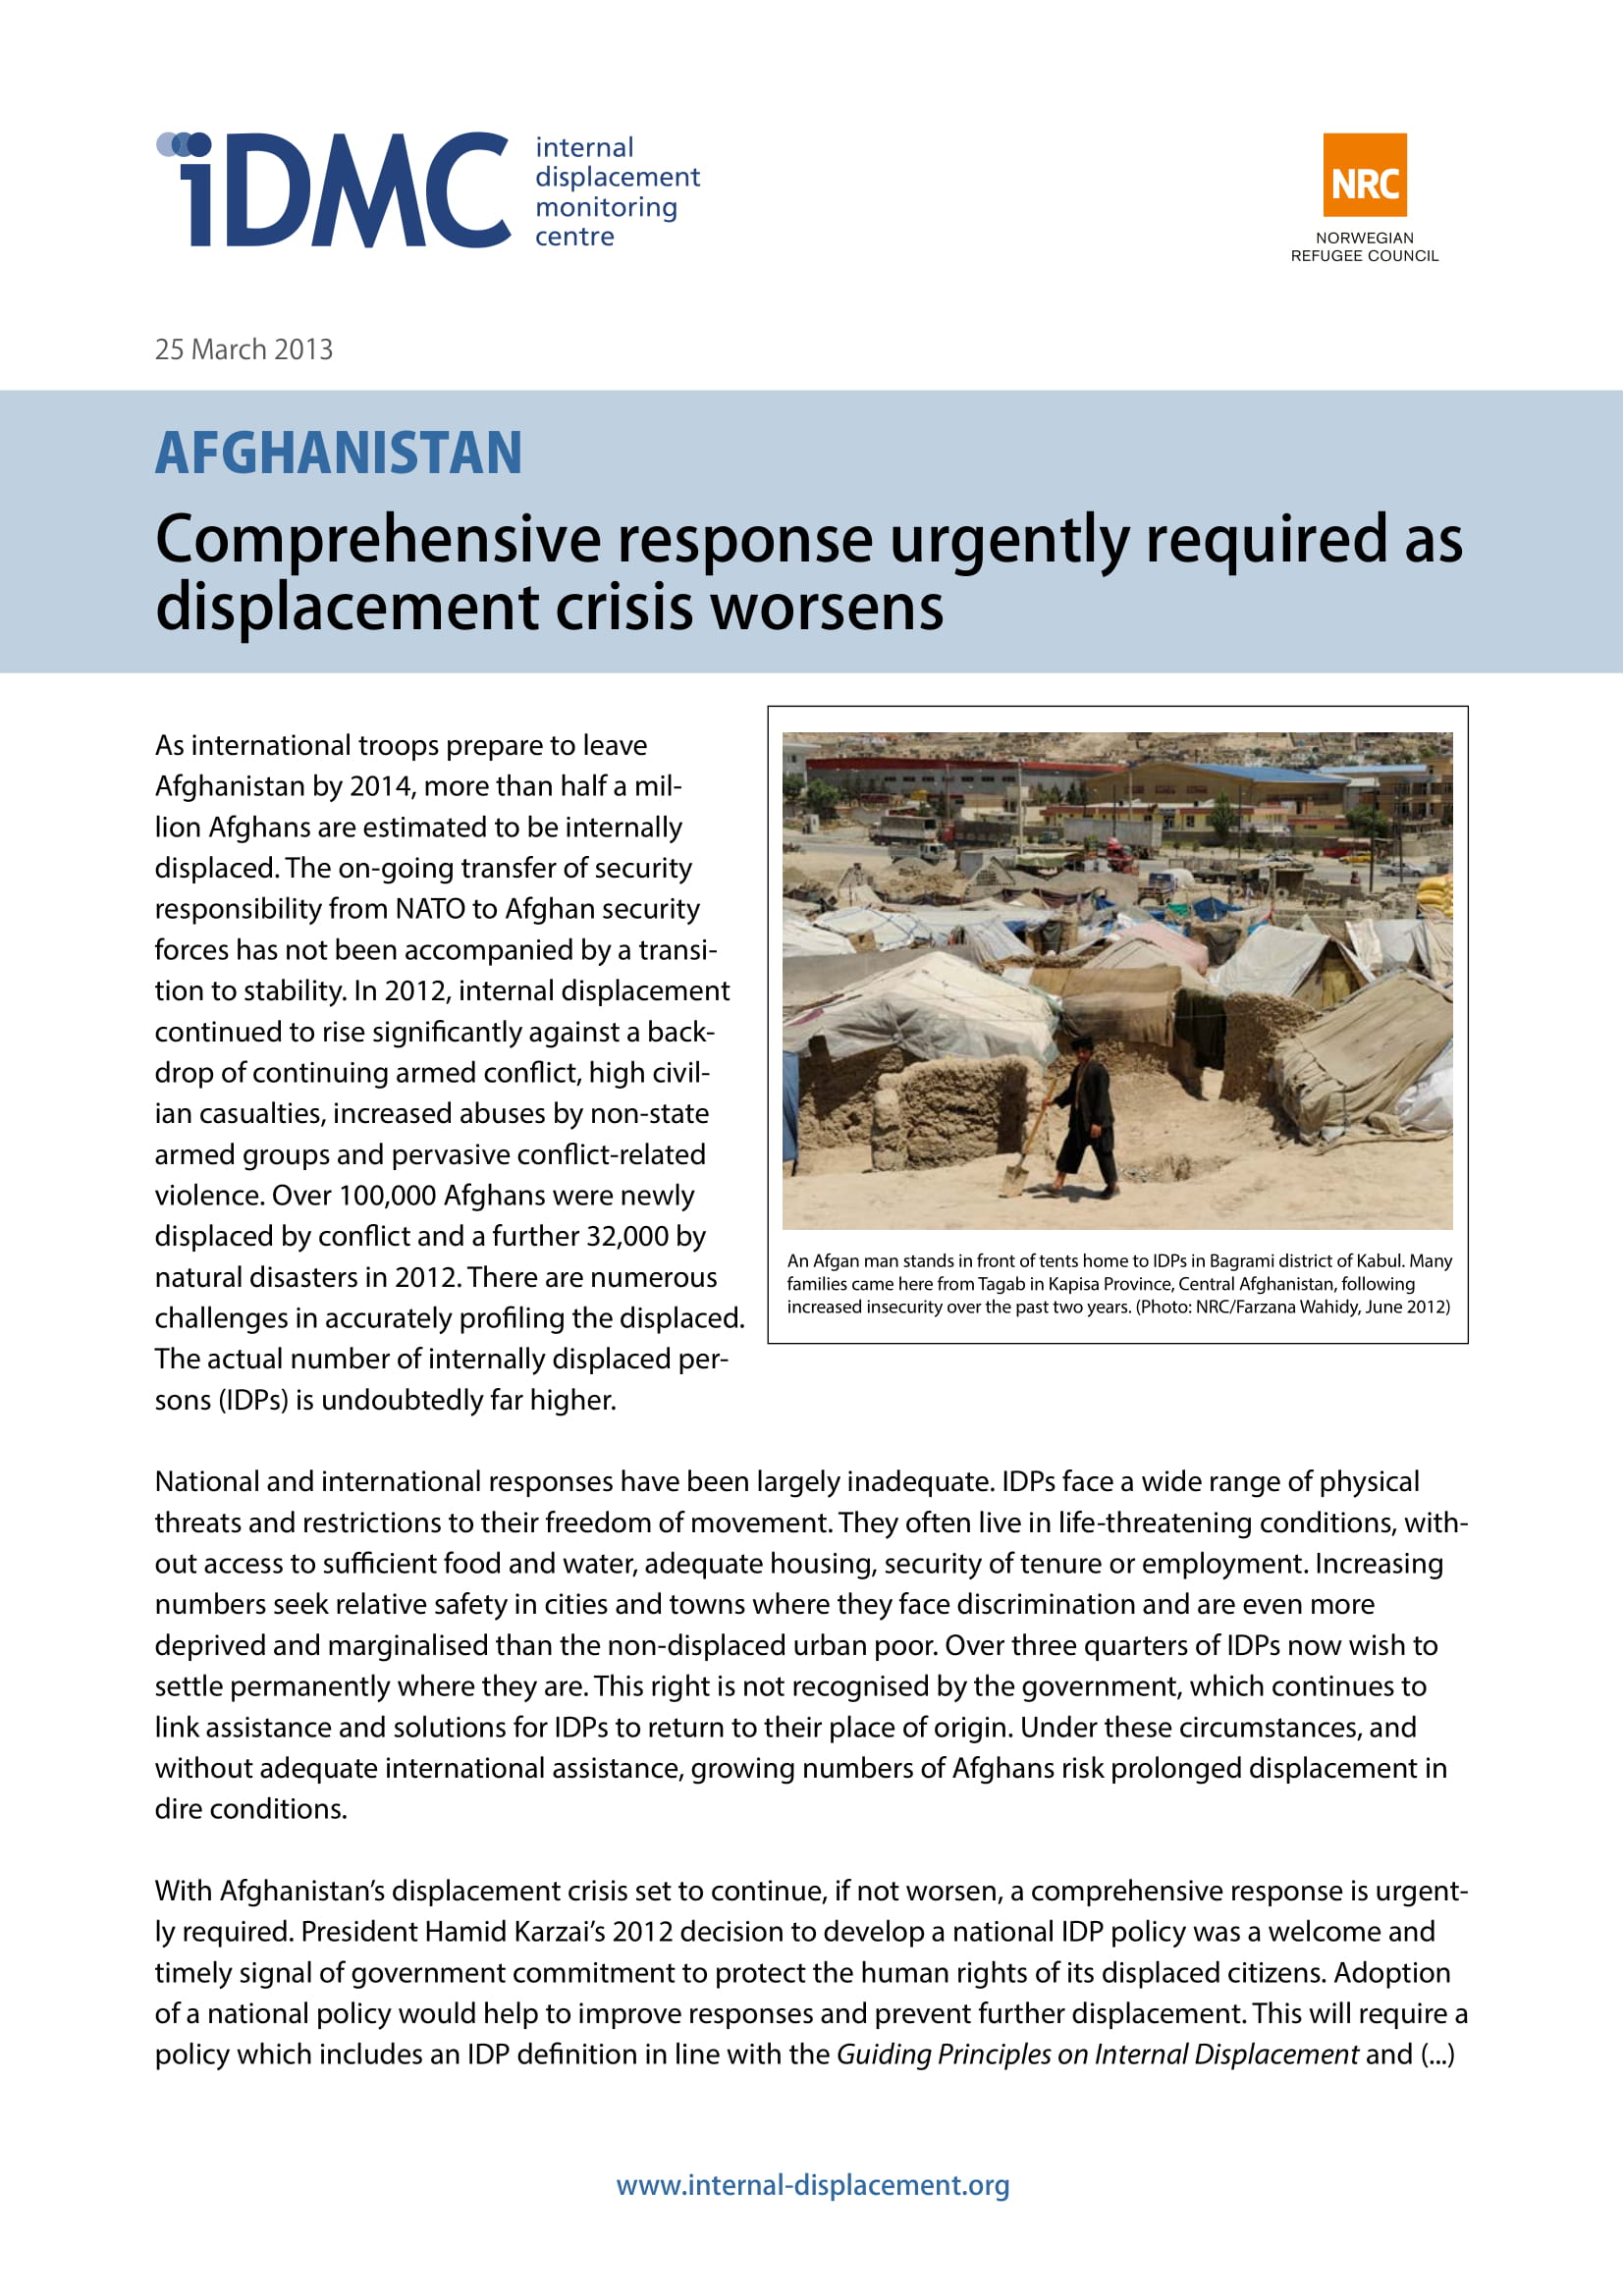 Afghanistan: Comprehensive response urgently required as displacement crisis worsens